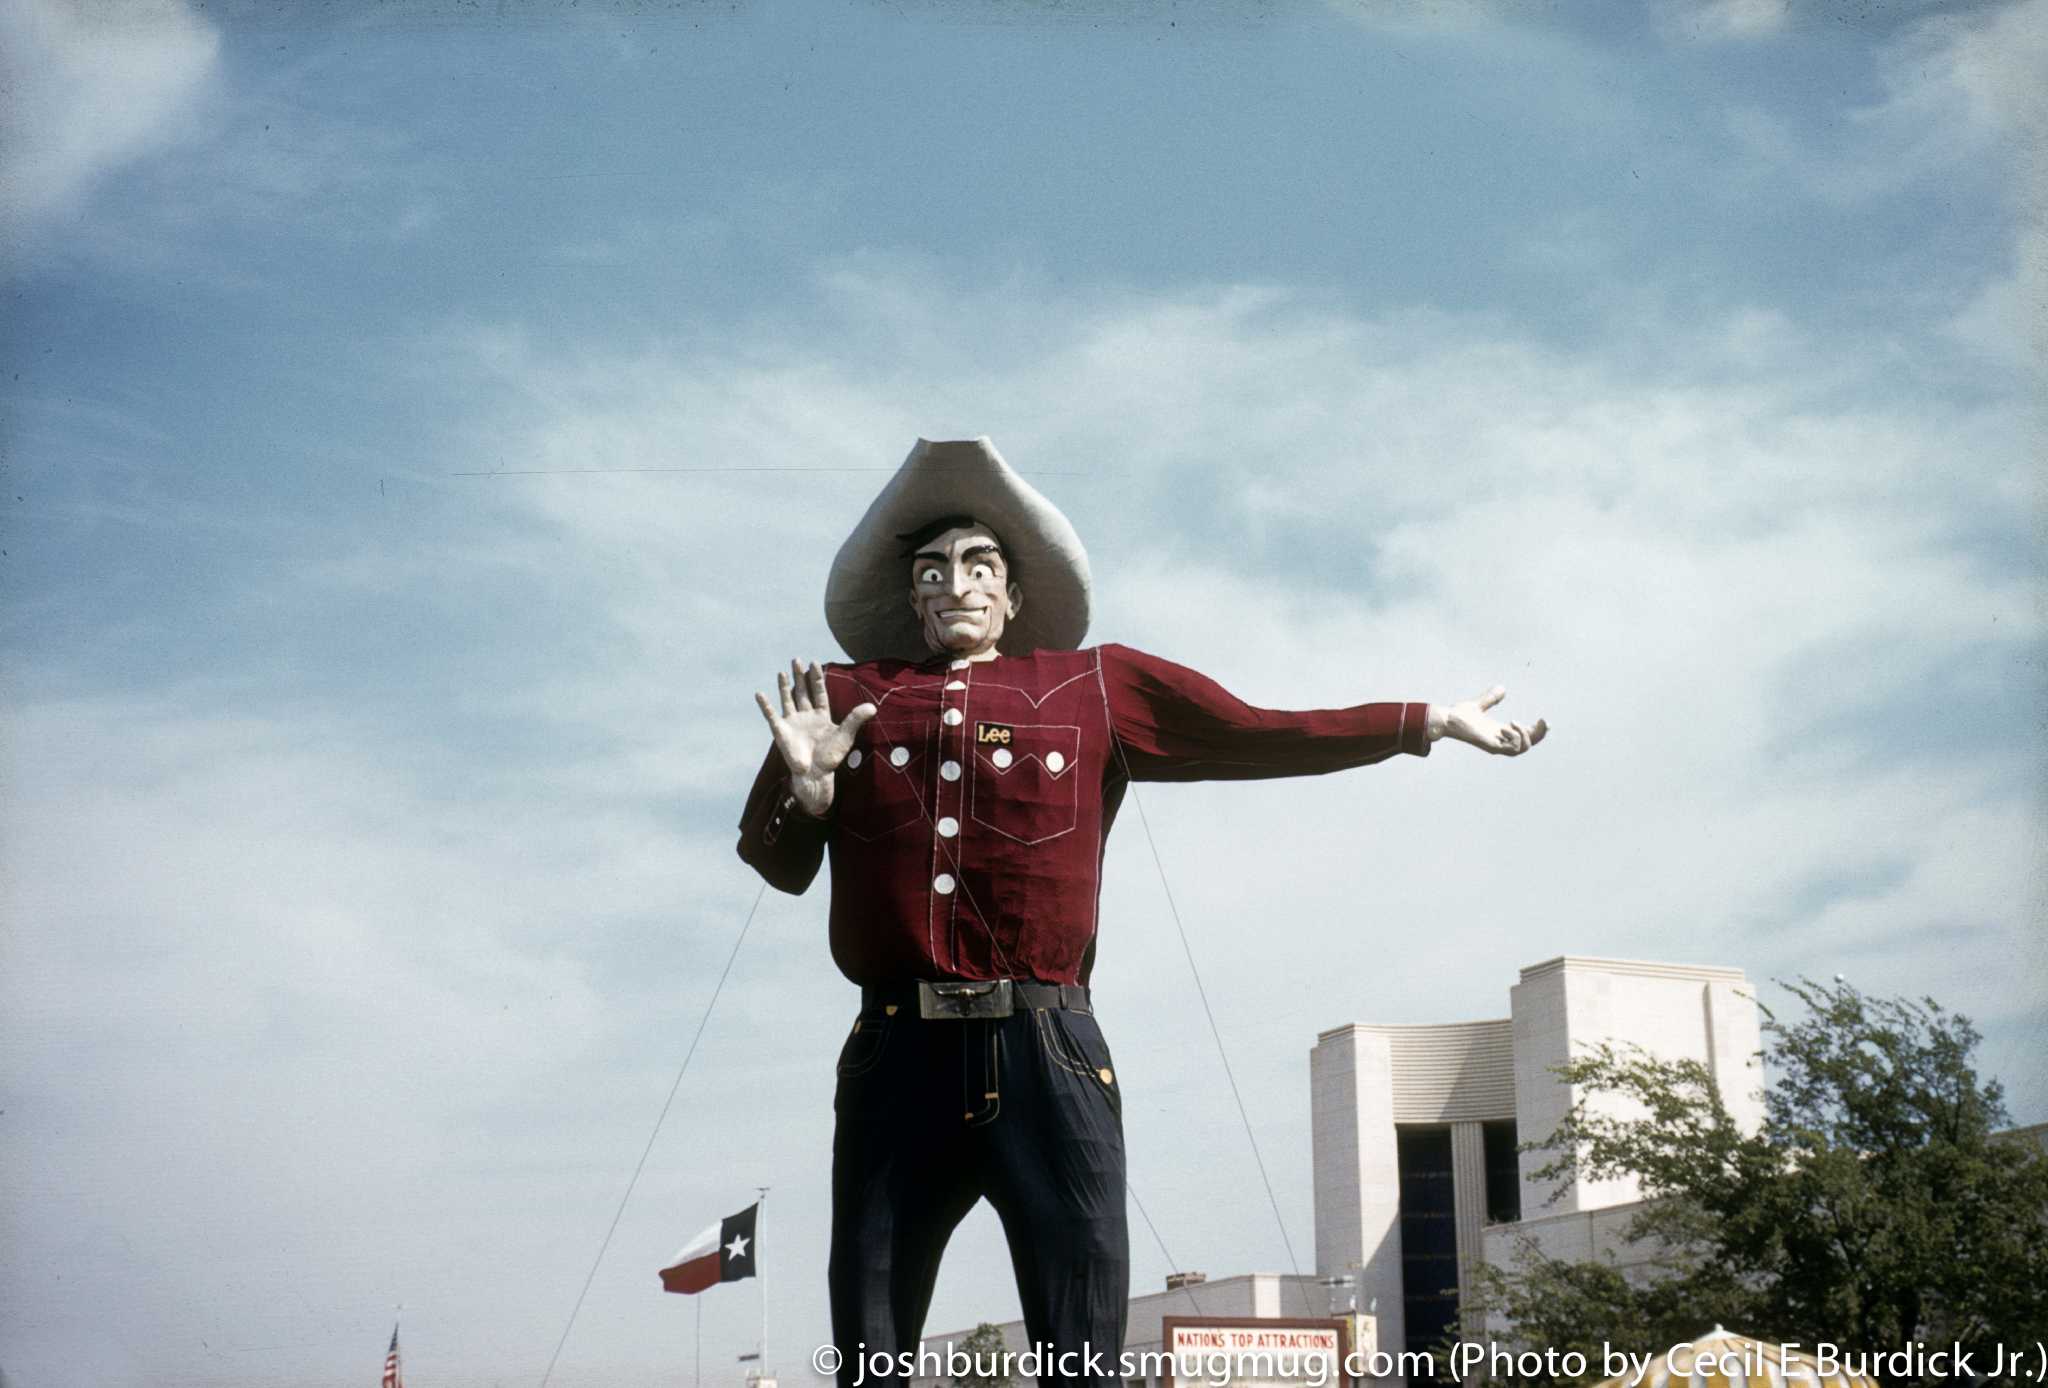 Vintage Texas State Fair photos: See what Big Tex looked like the year Elvis visited ...